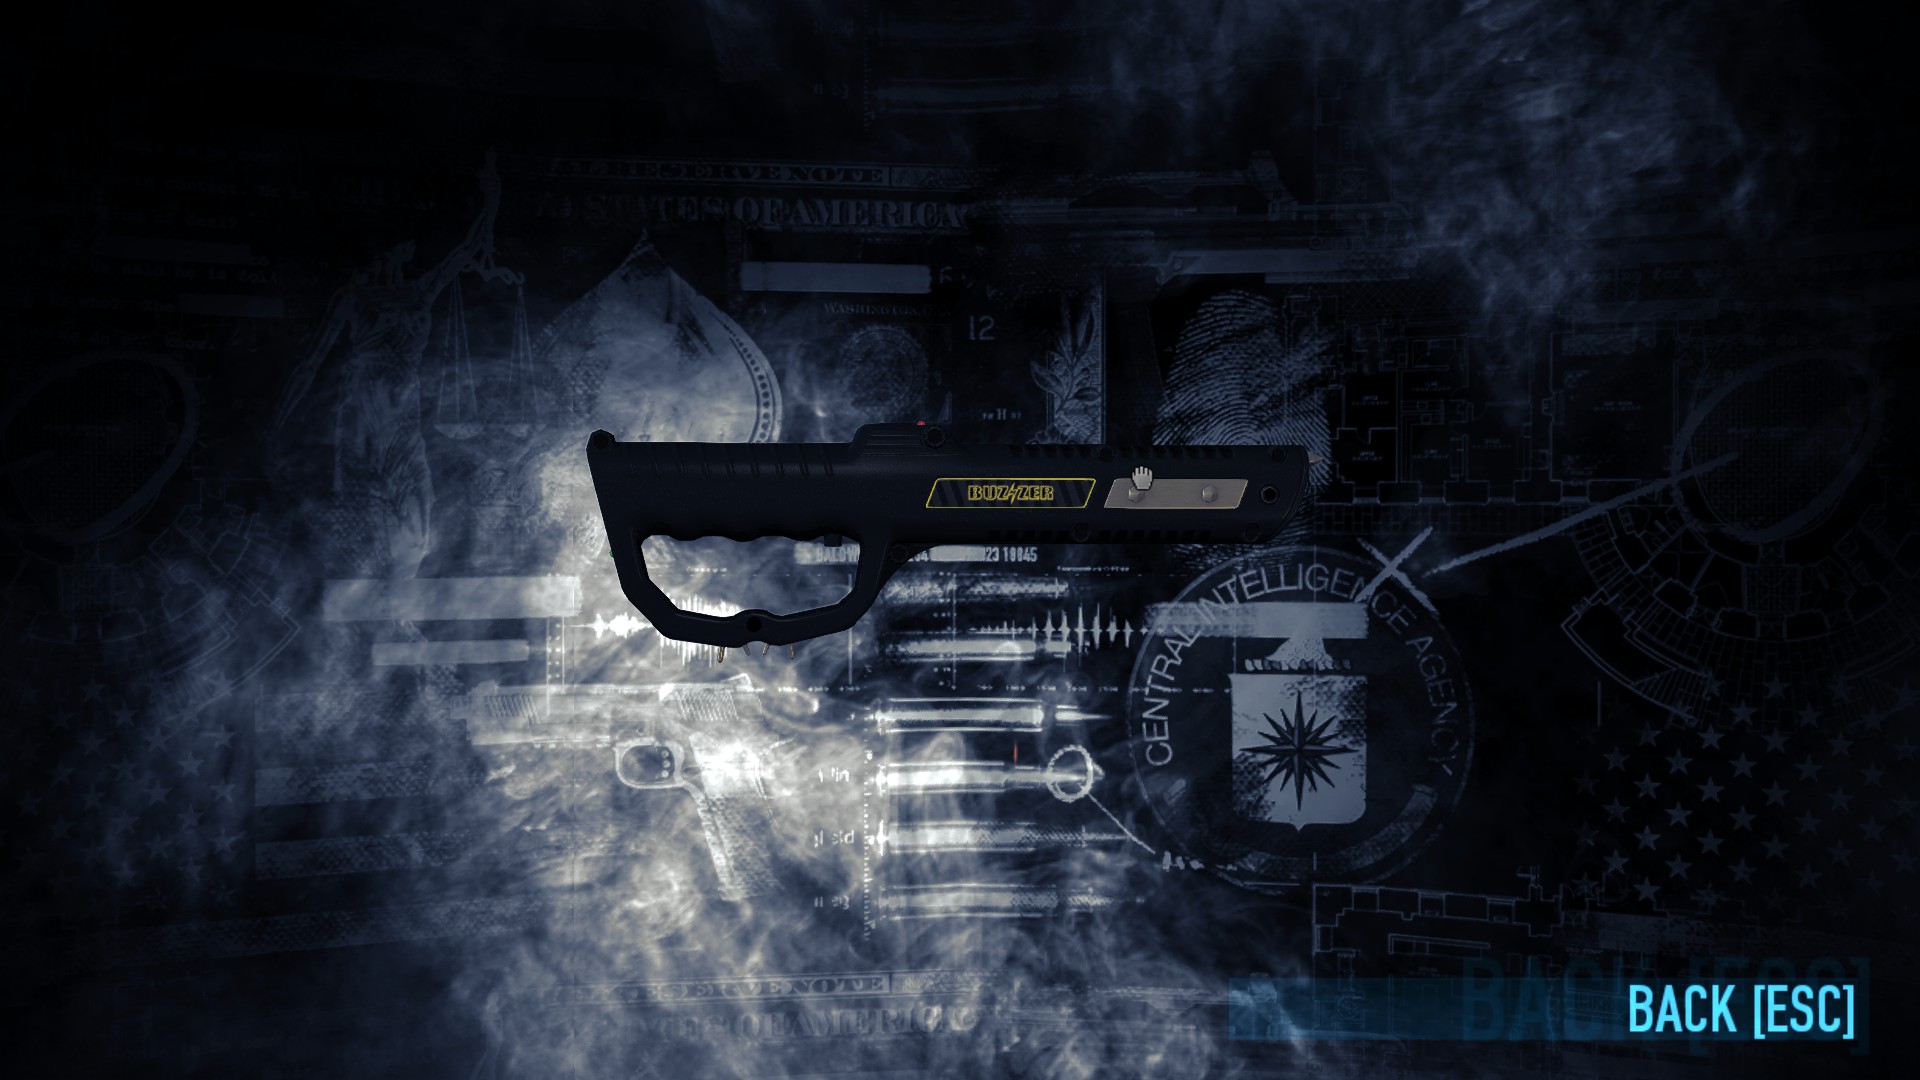 PAYDAY 2 - 2 Types of LMG builds (DSOD) Leech + Anarchist - Buzzer Melee - 7BF2E9F